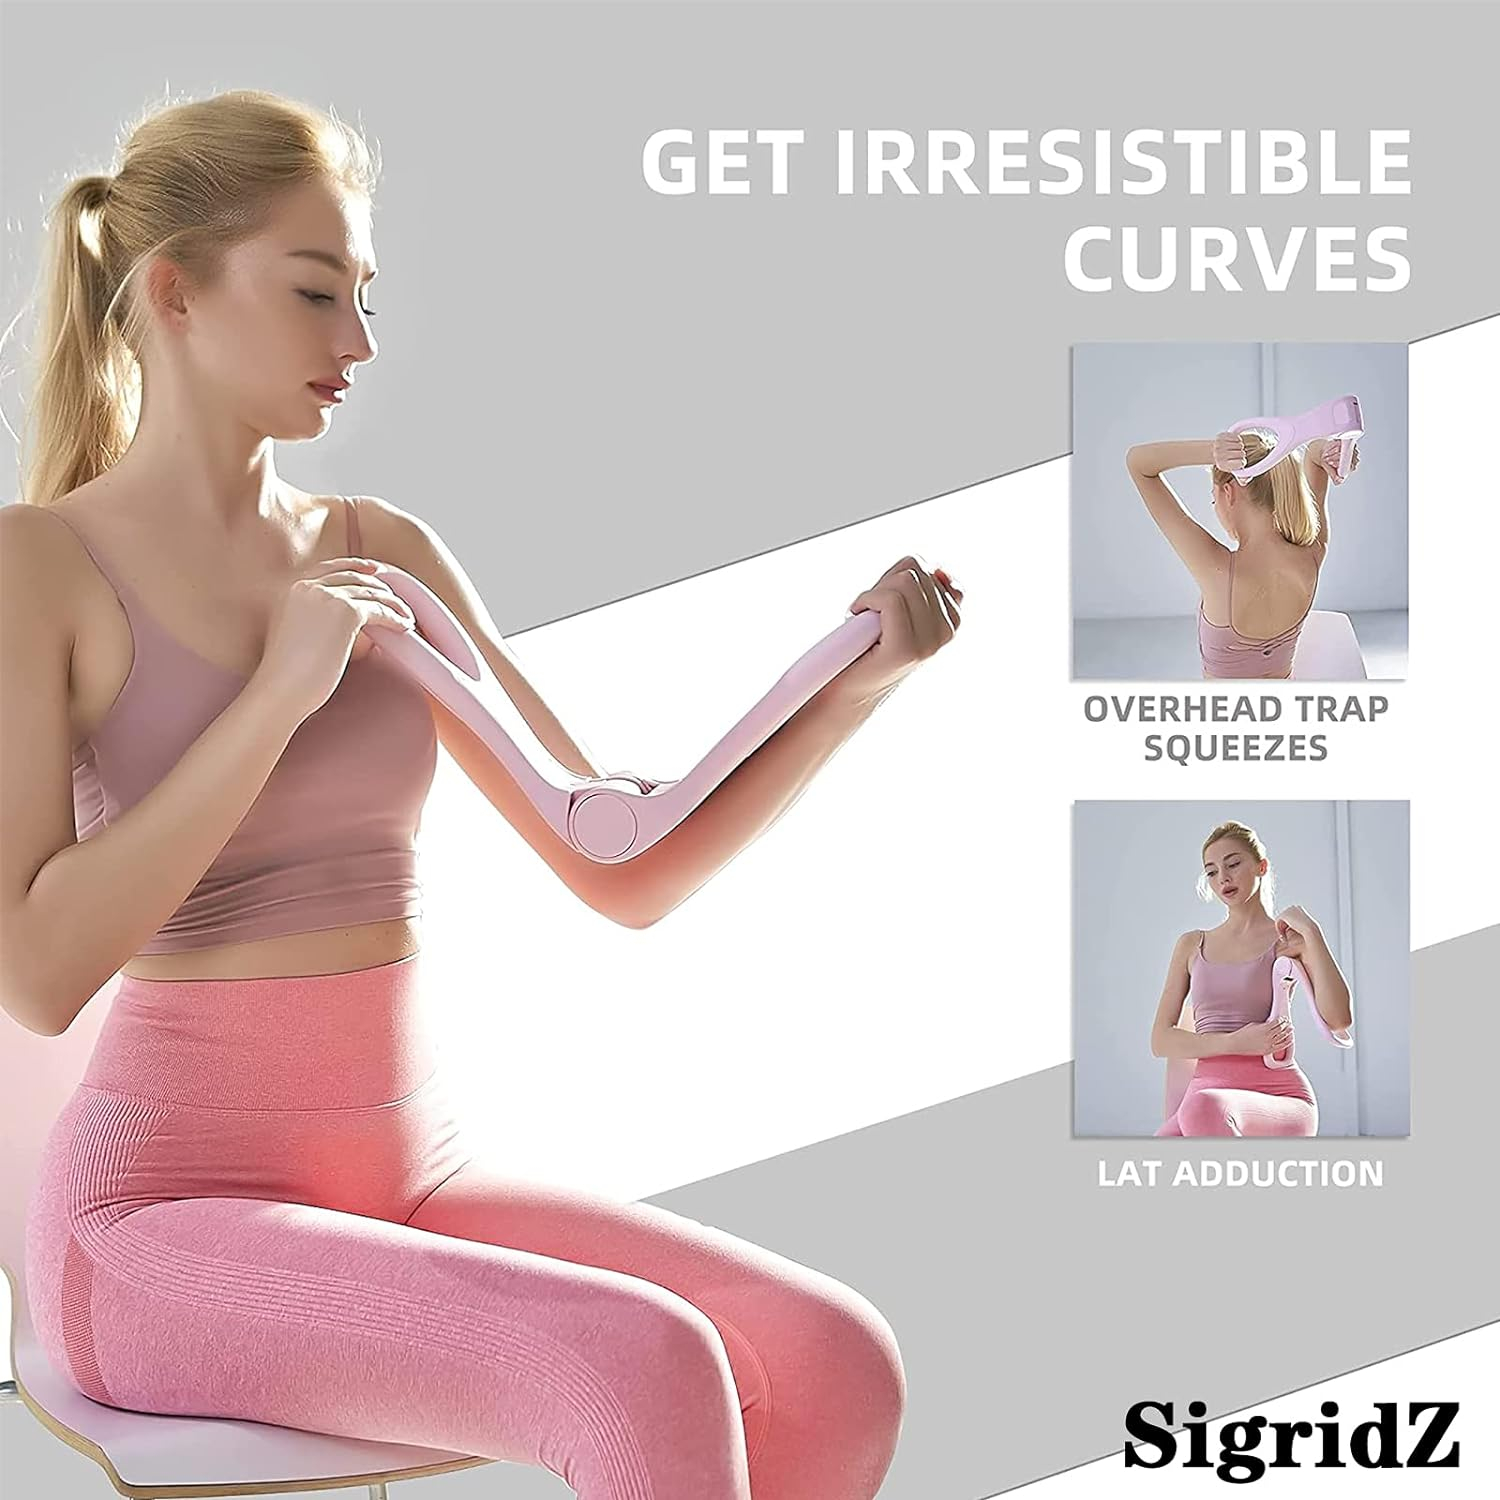 SigridZ Thigh Master,Home Fitness Equipment,Workout Equipment of Arms,Inner Thigh Toners Master,Trimmer Thin Body,Leg Exercise Equipment,Arm Trimmers,Best for Weight Loss[Upgrade Version]